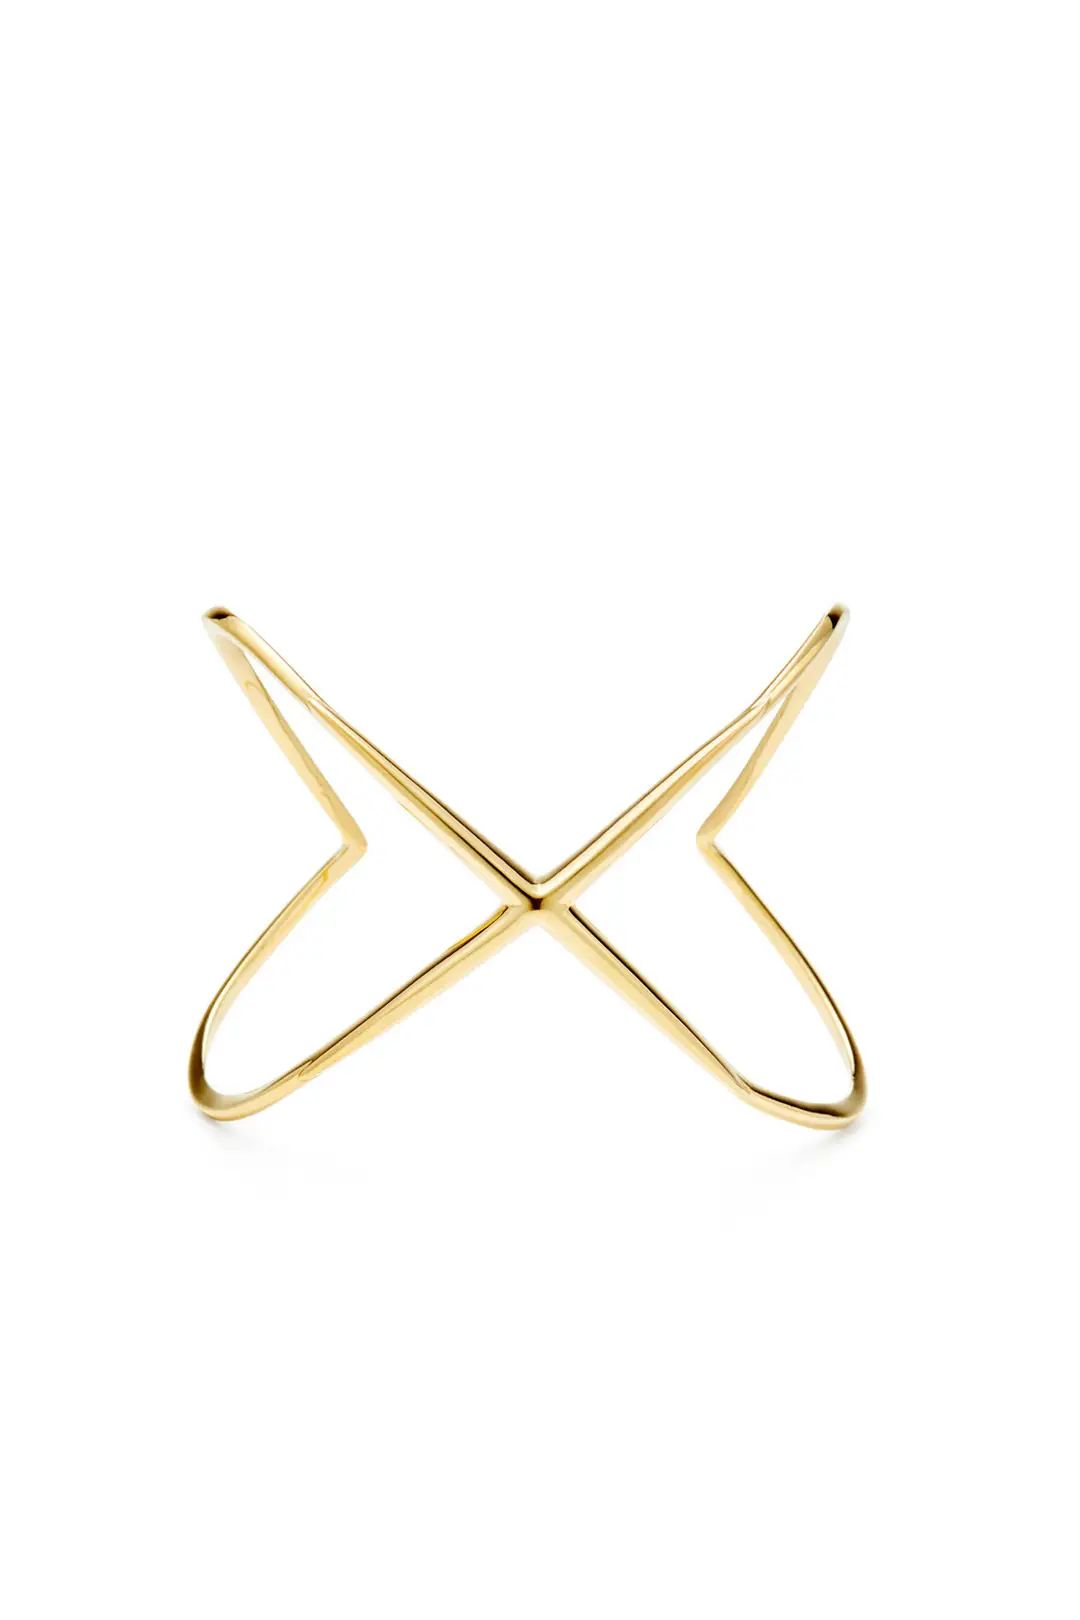 Elizabeth and James Accessories Windrose Cuff | Rent The Runway